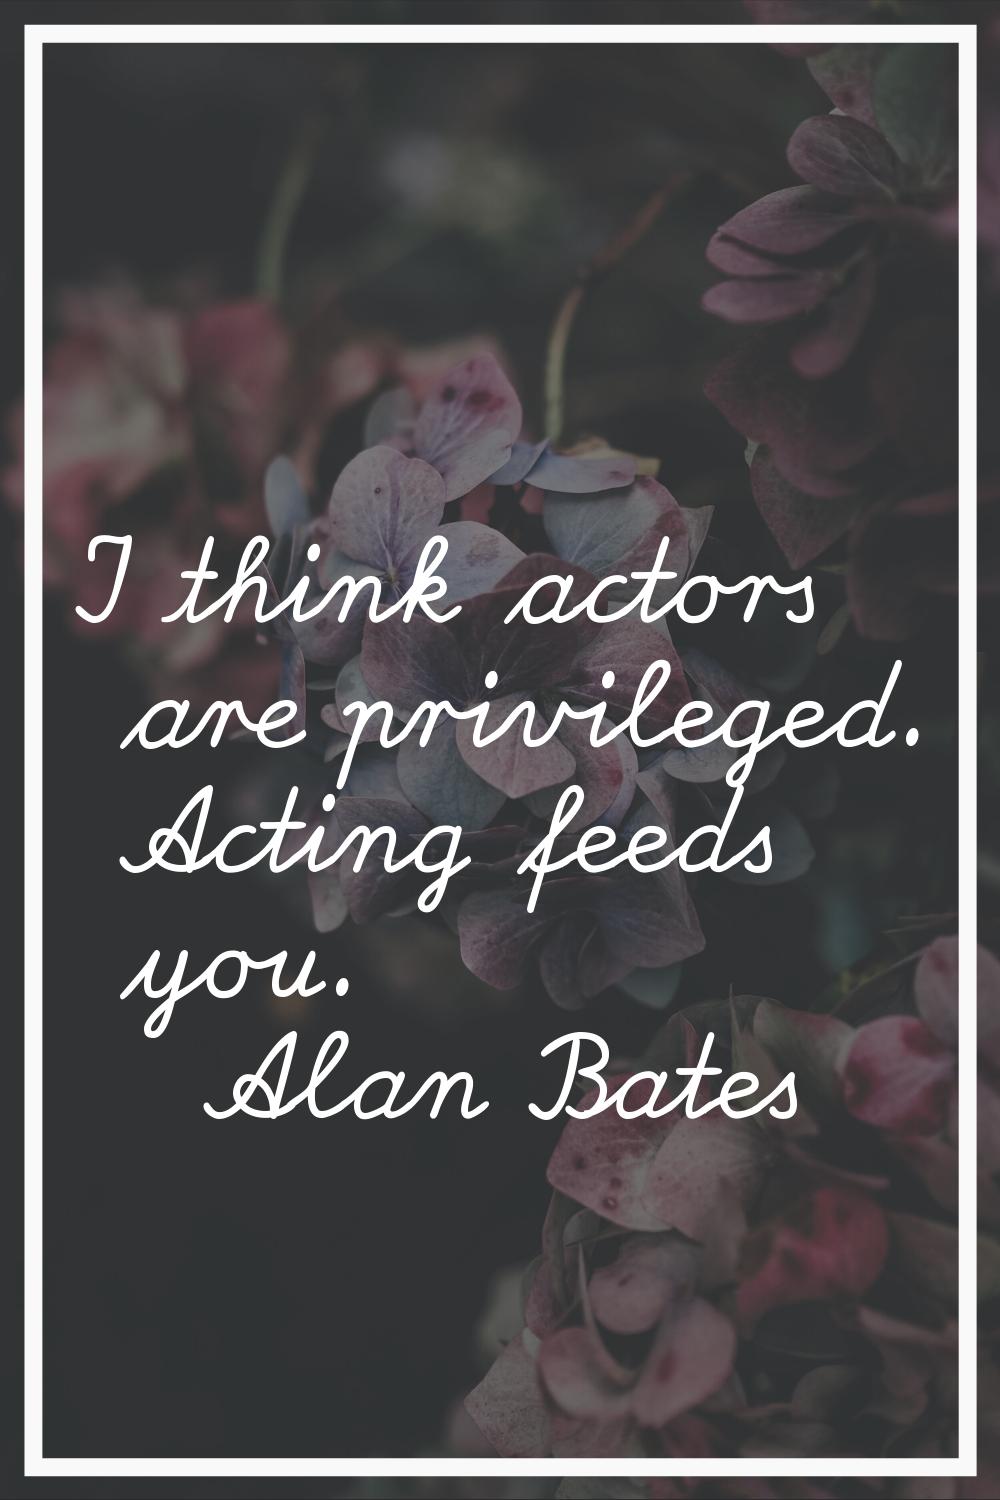 I think actors are privileged. Acting feeds you.